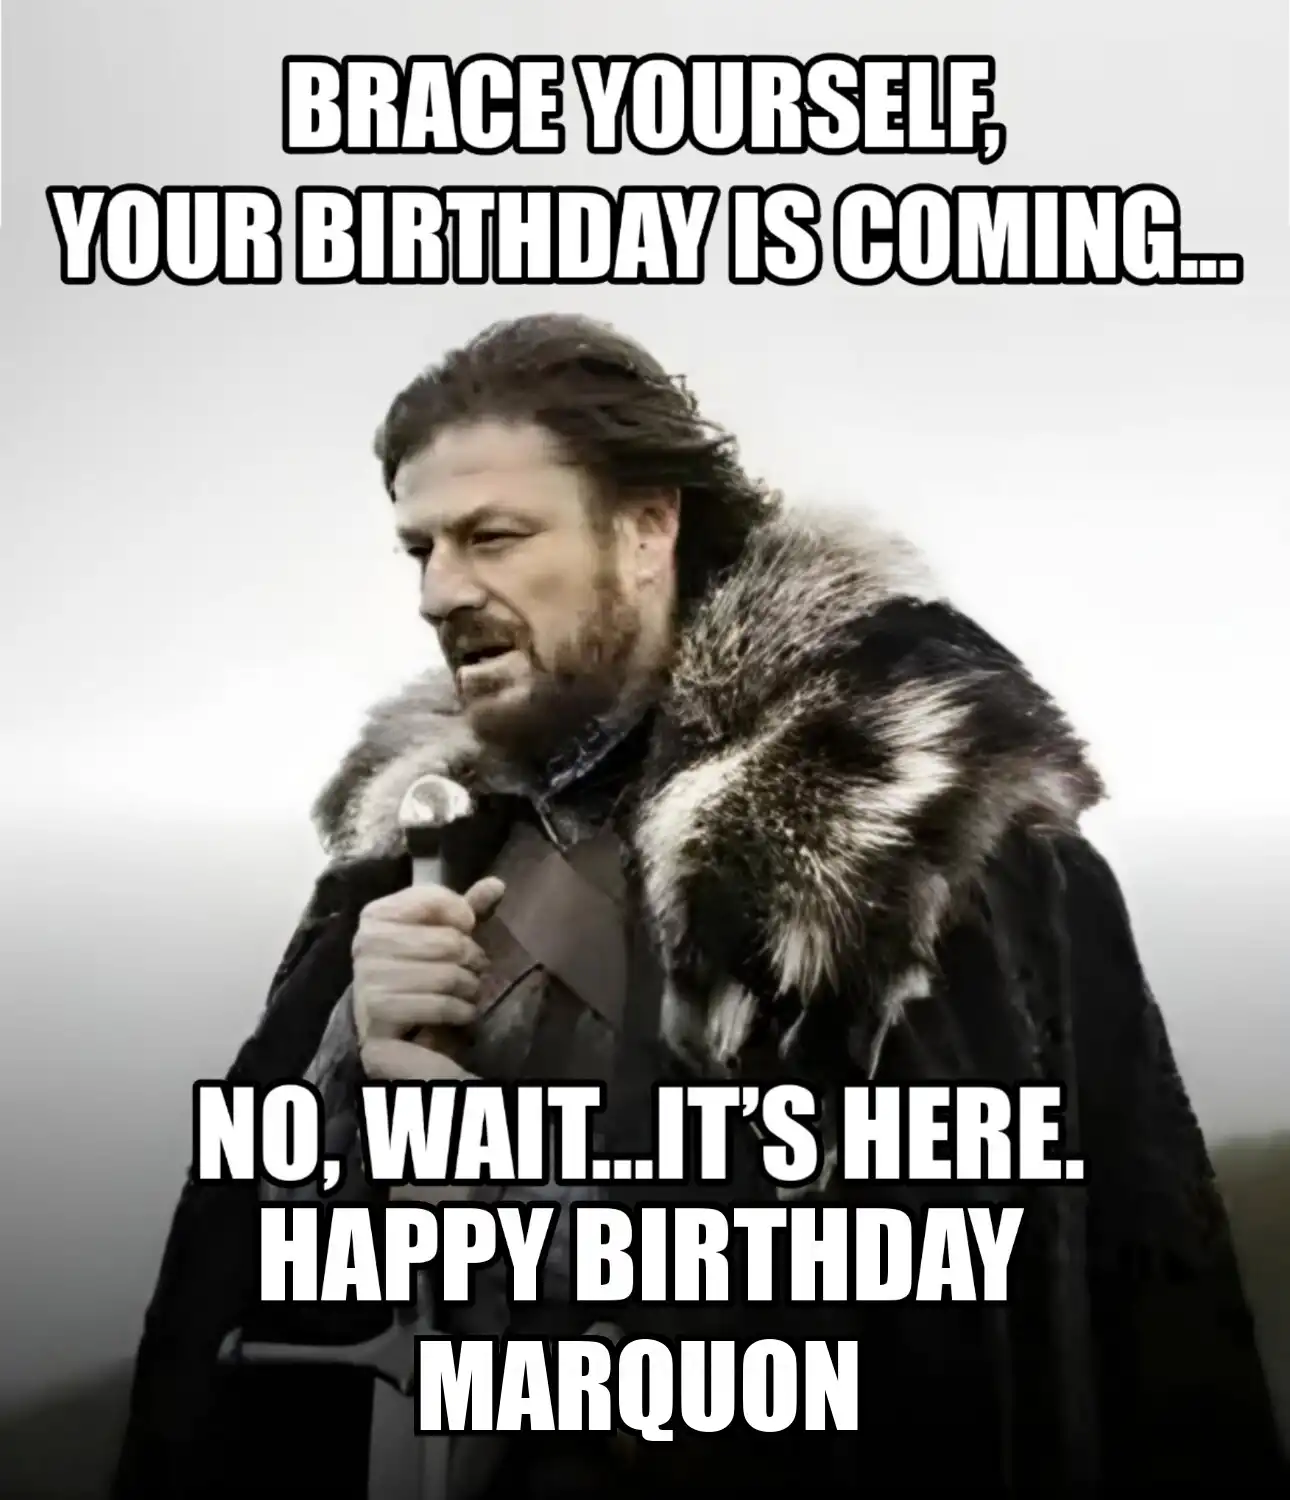 Happy Birthday Marquon Brace Yourself Your Birthday Is Coming Meme